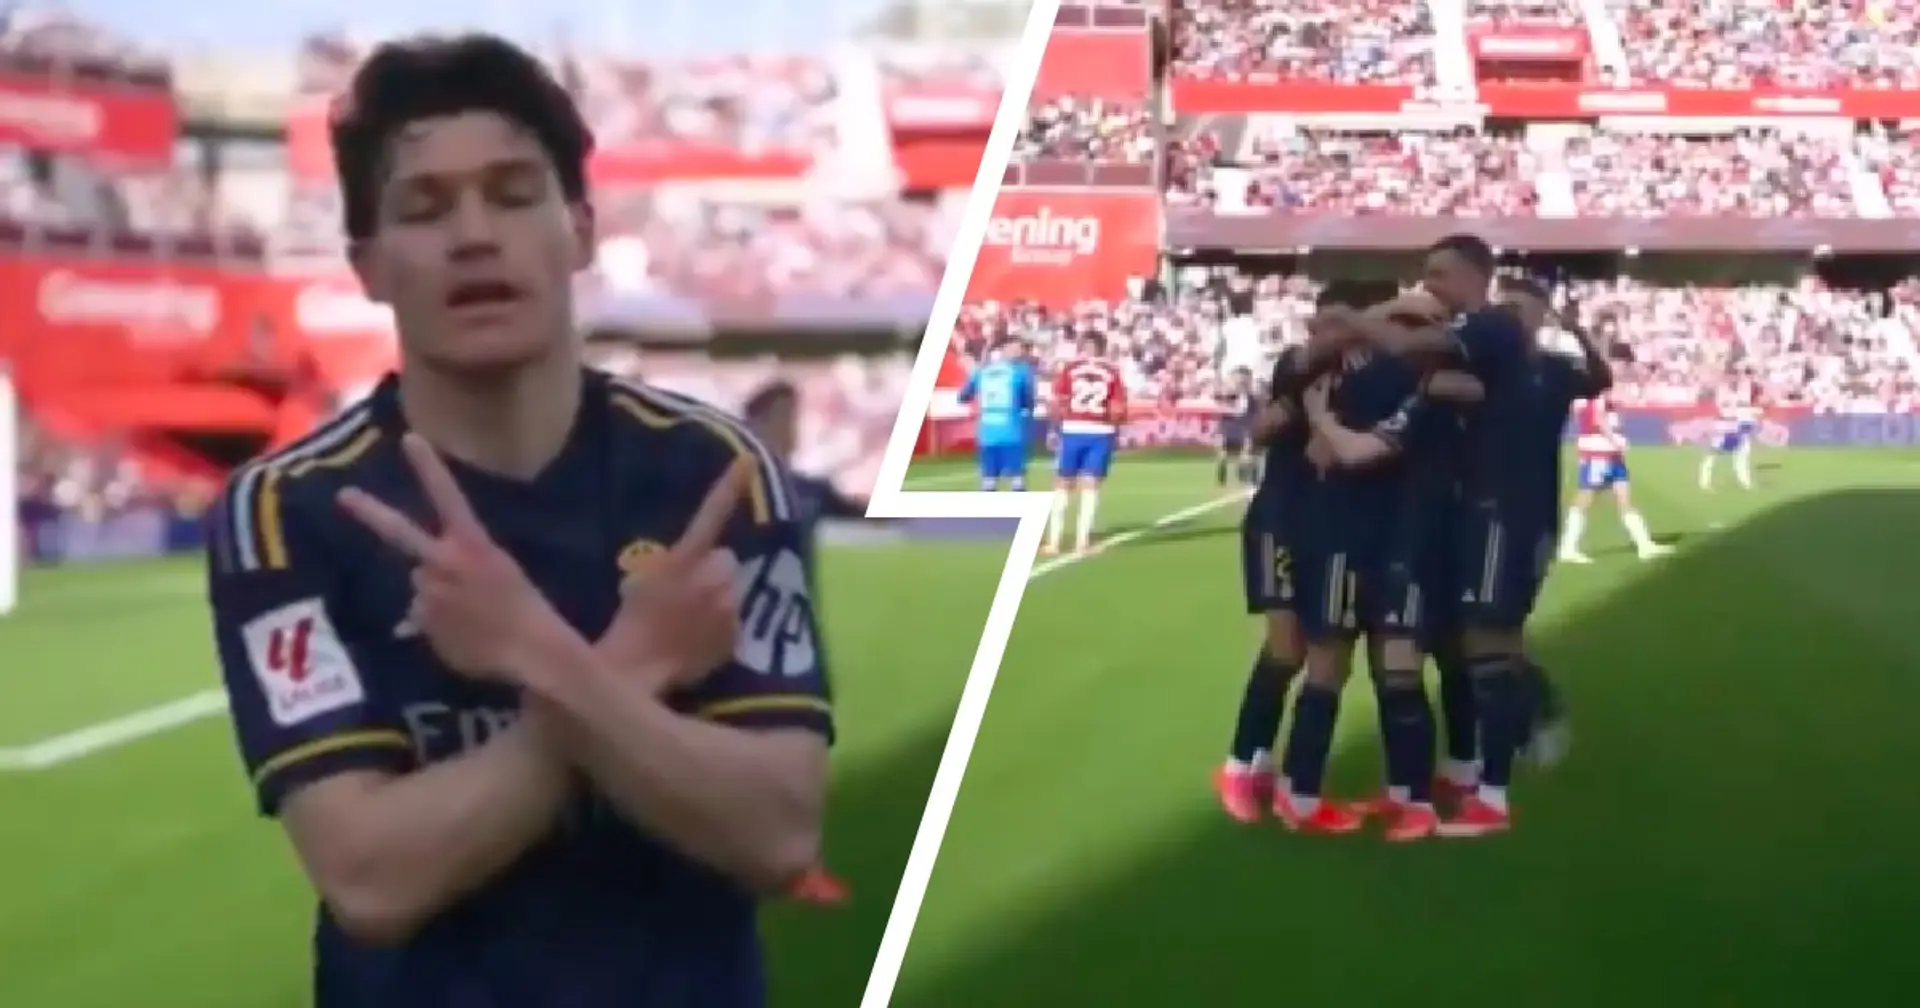 Fran Garcia scores first Real Madrid goal - he has two teammates to thank 